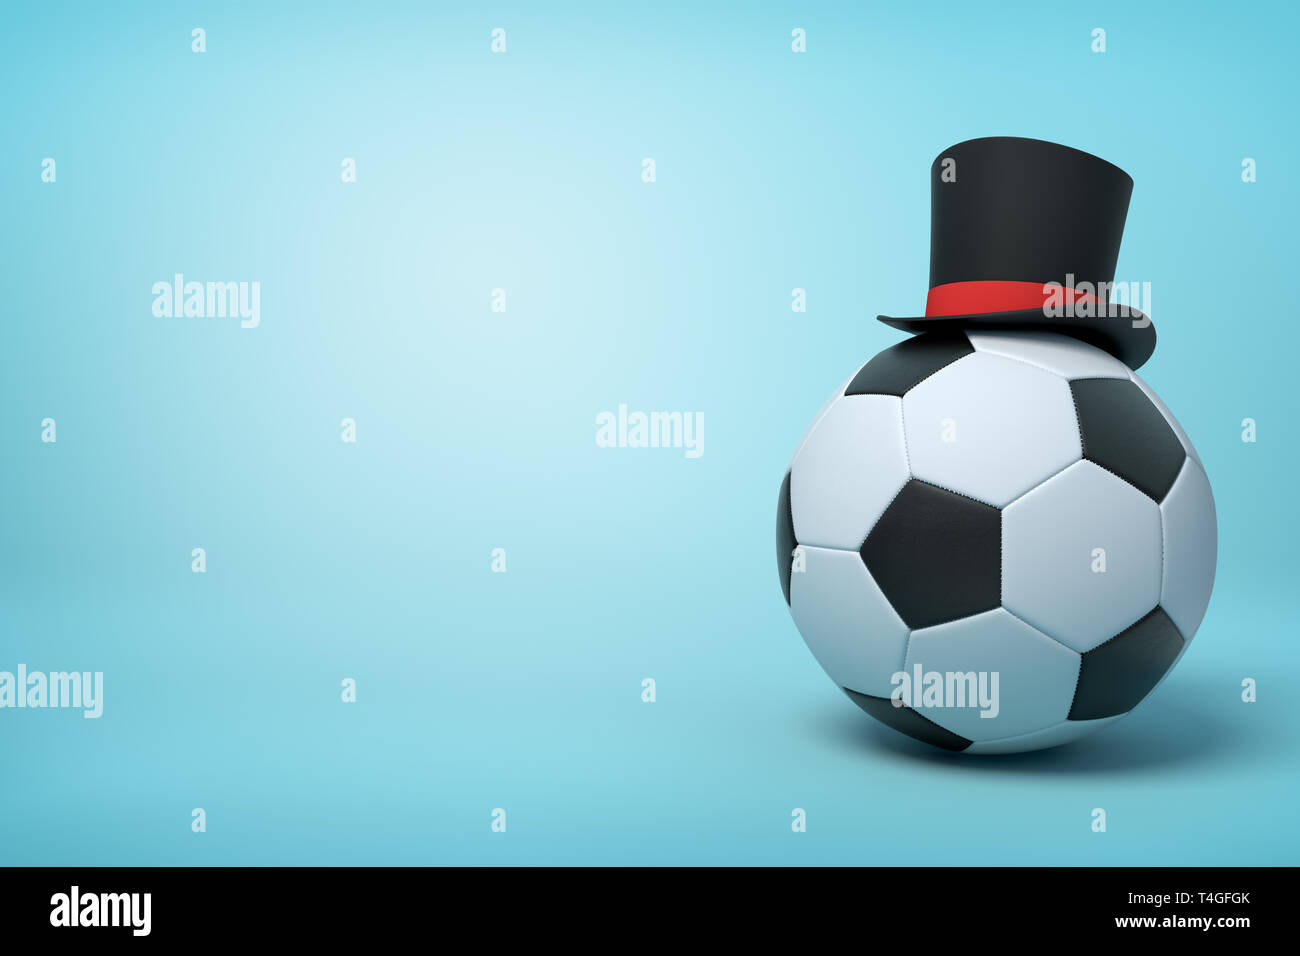 3d rendering of football wearing black tophat with much copy space on the rest of light blue background. Stock Photo